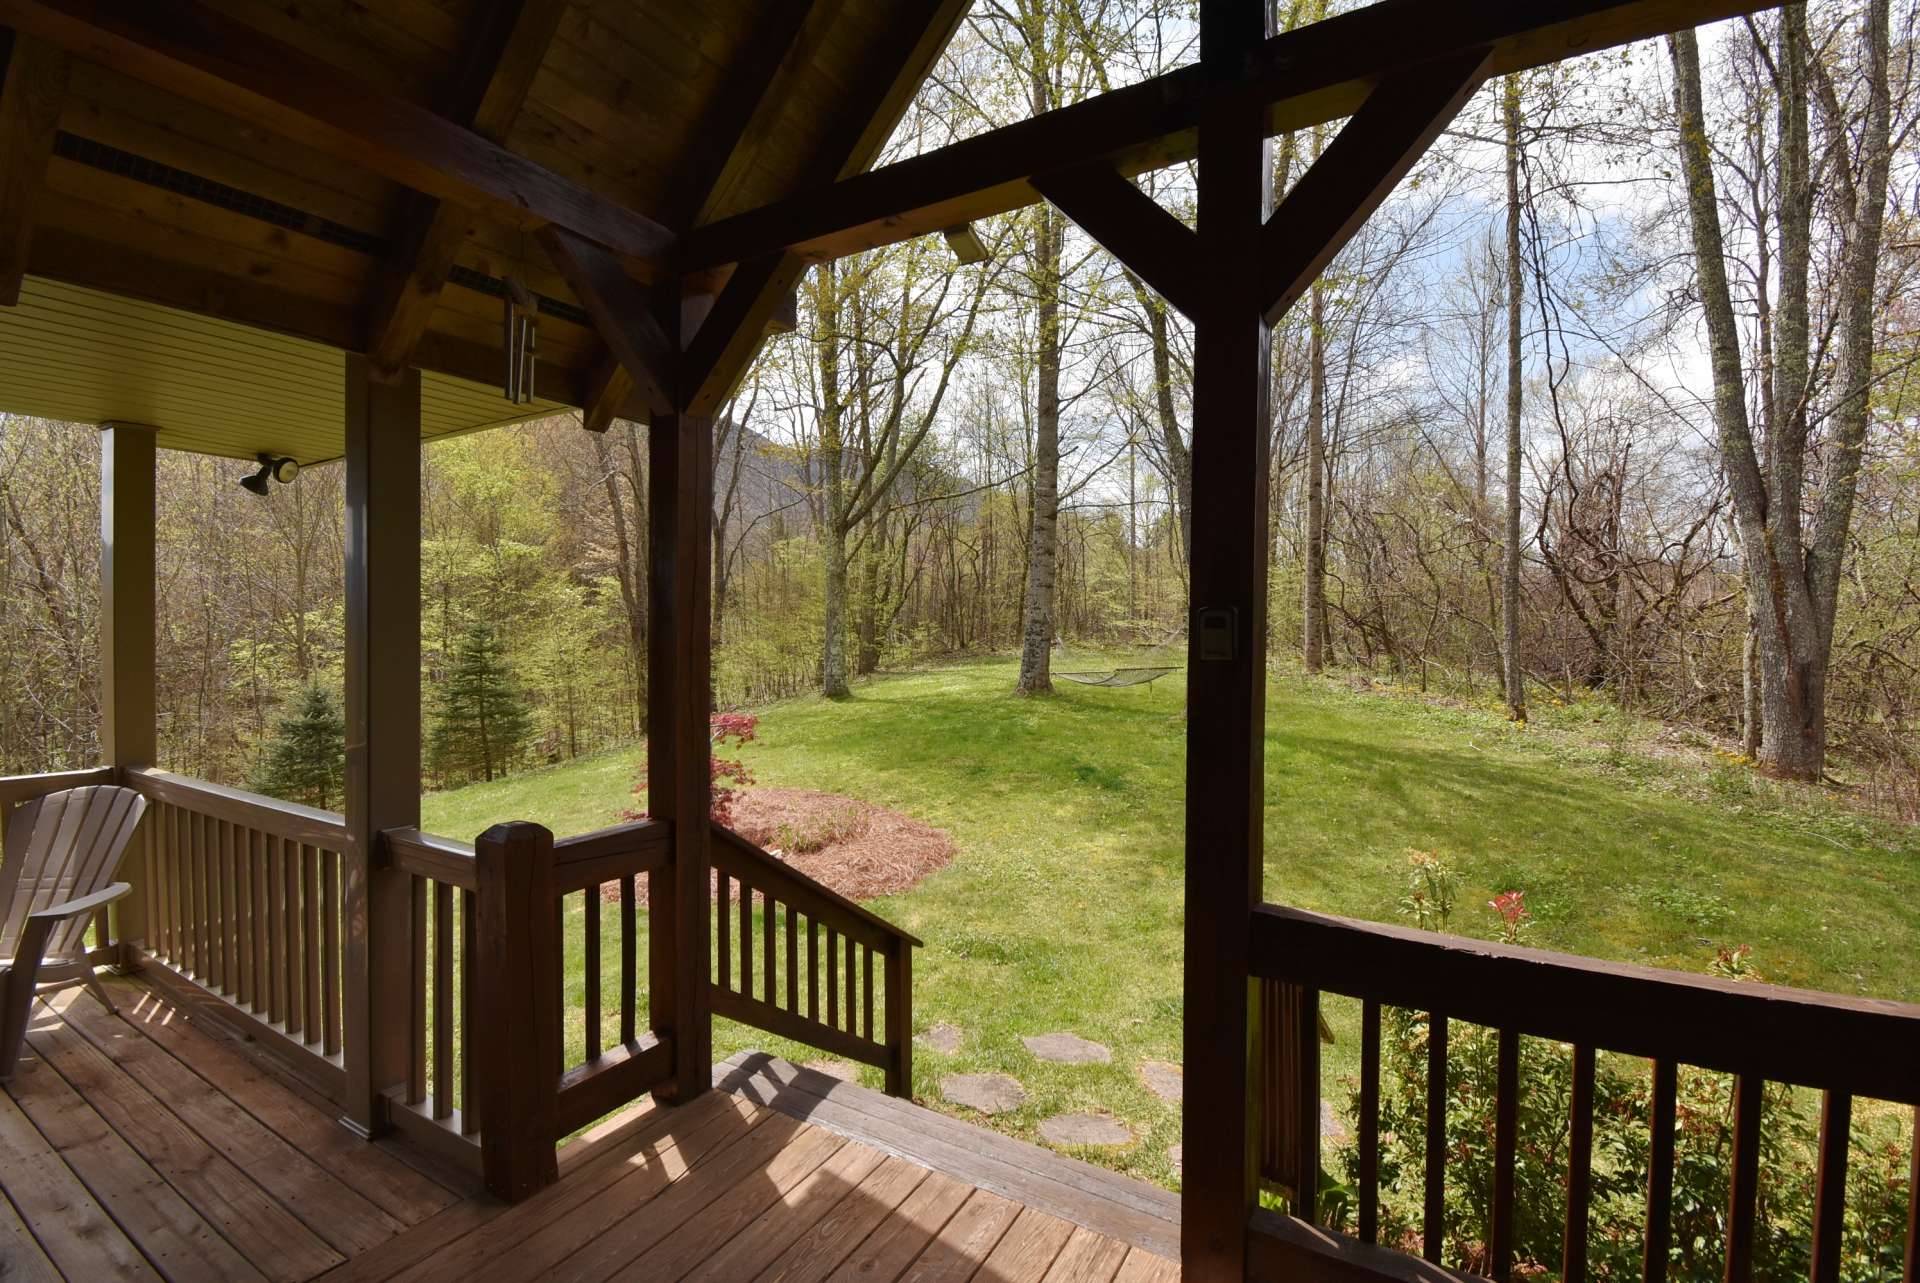 Or, simply relax with sounds of birds singing and the  gentle mountain breezes whispering through the trees.